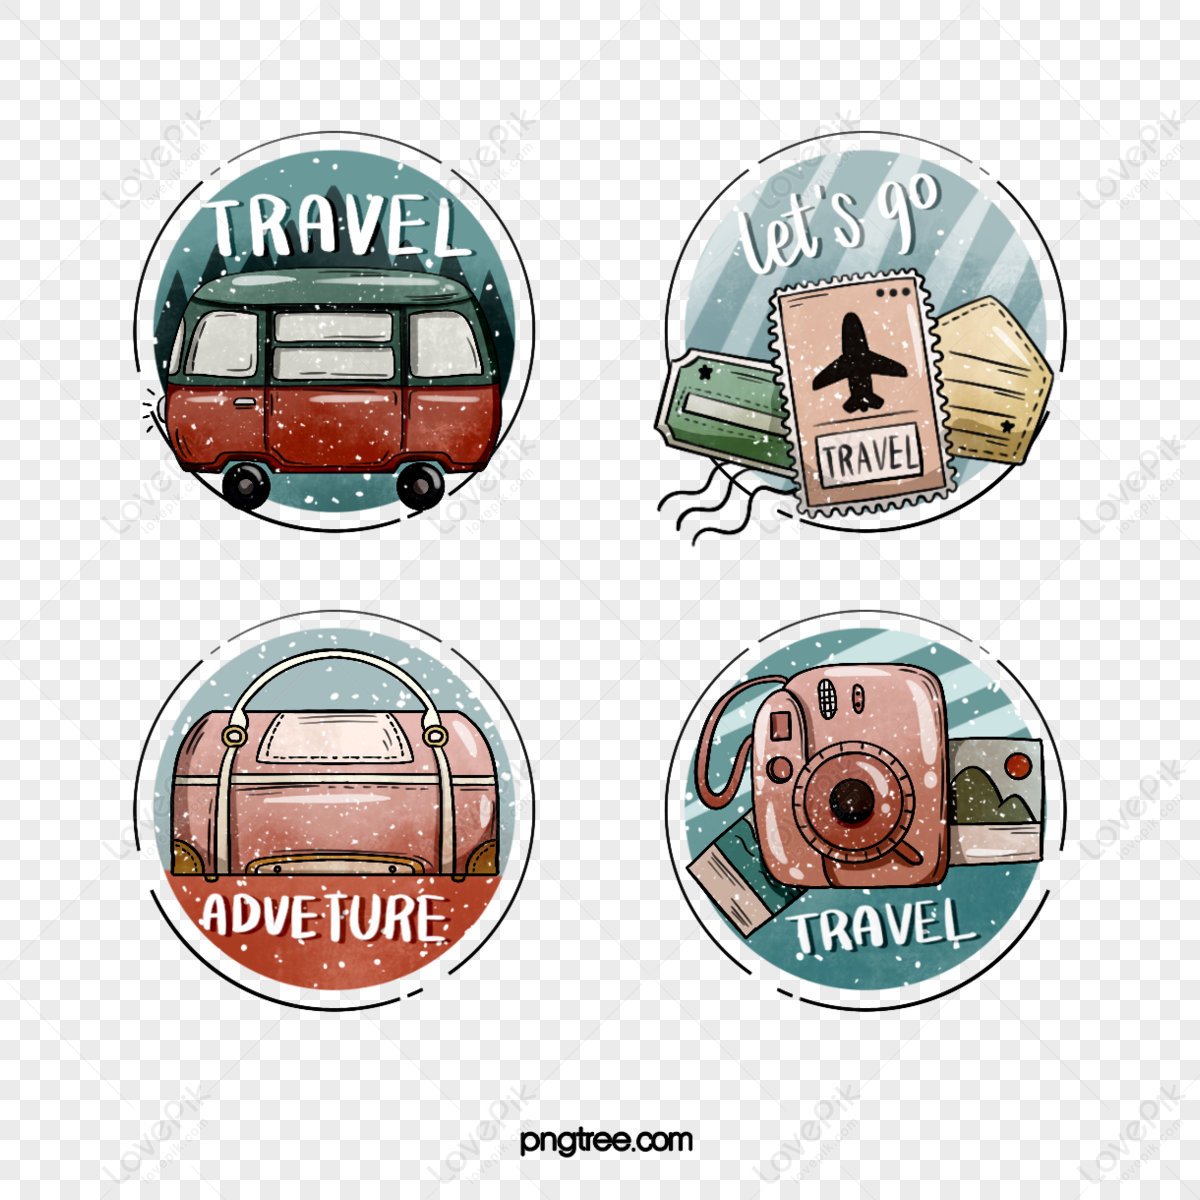 Cartoon hand drawn travel stickers small elements,hand painted,plane tickets png white transparent